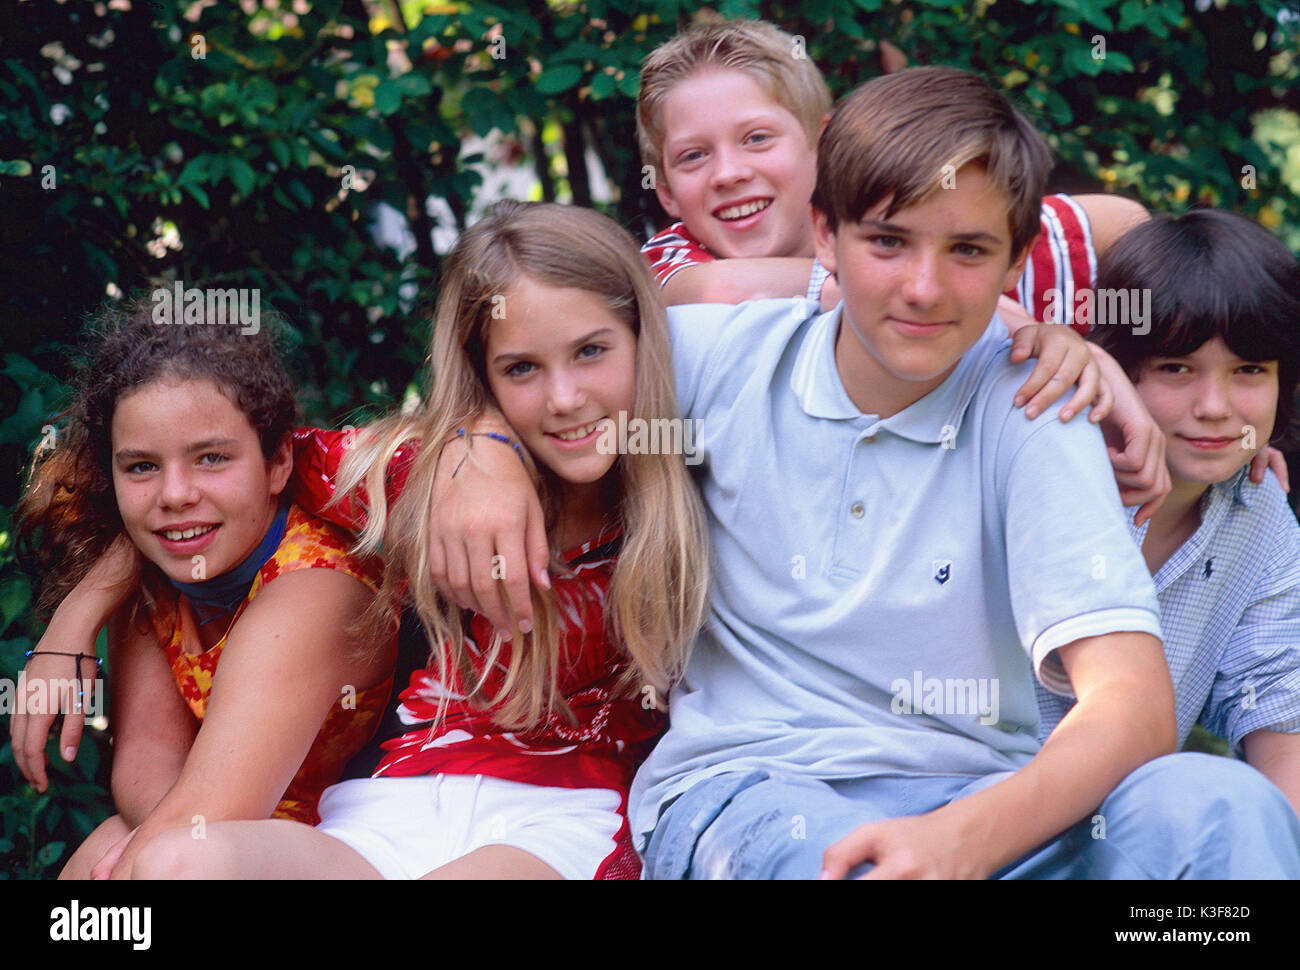 Group of laughing children / of young persons Stock Photo